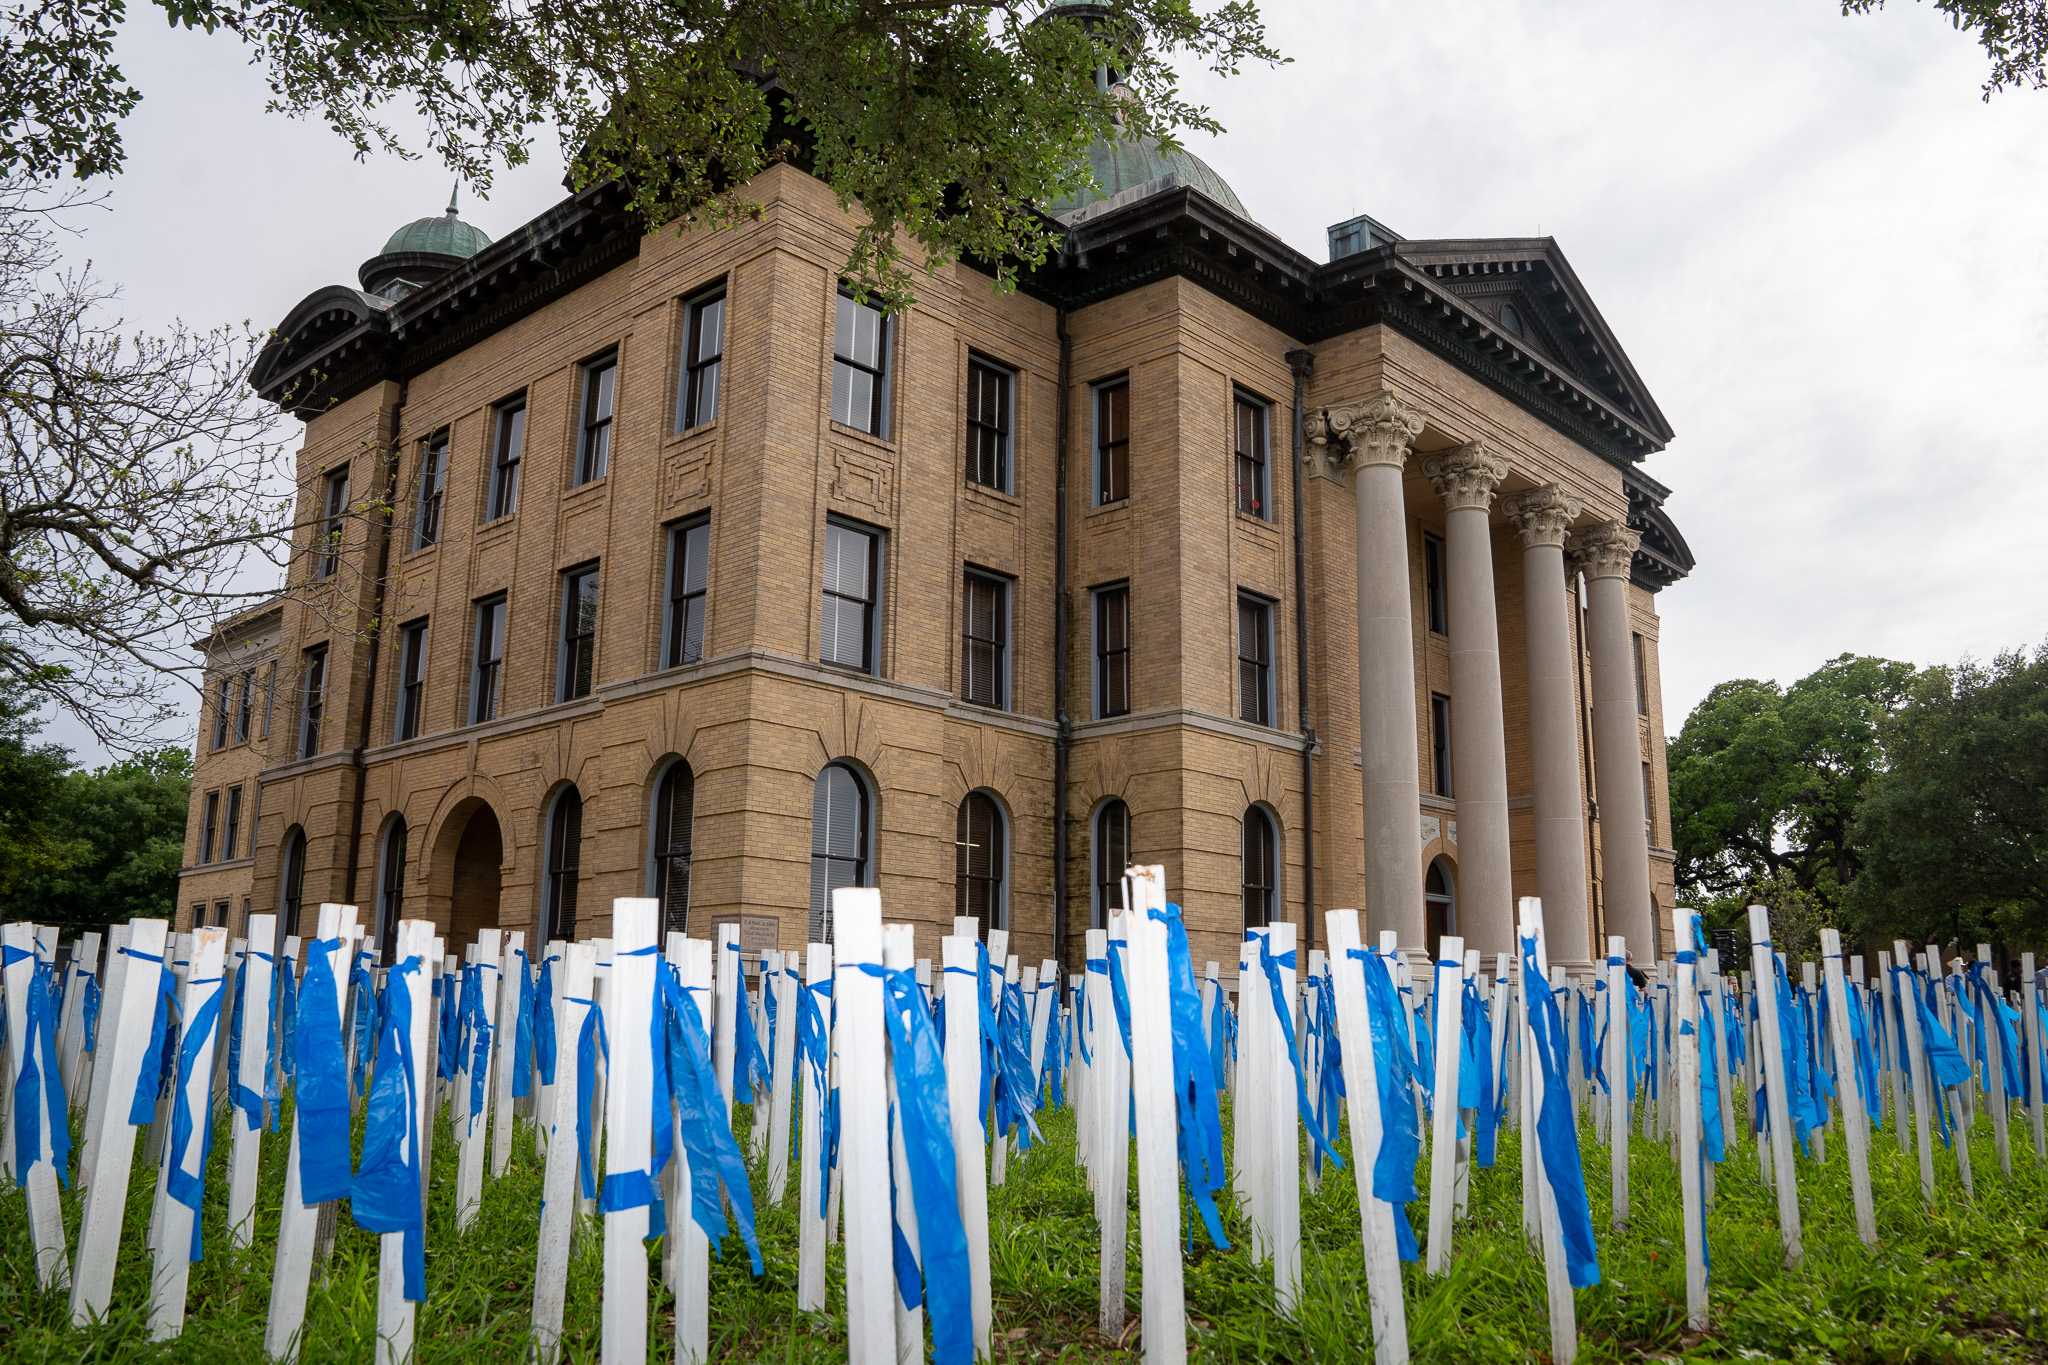 Fort Bend County Display Reveals Harsh Reality of Local Child Abuse Through Visual Representation